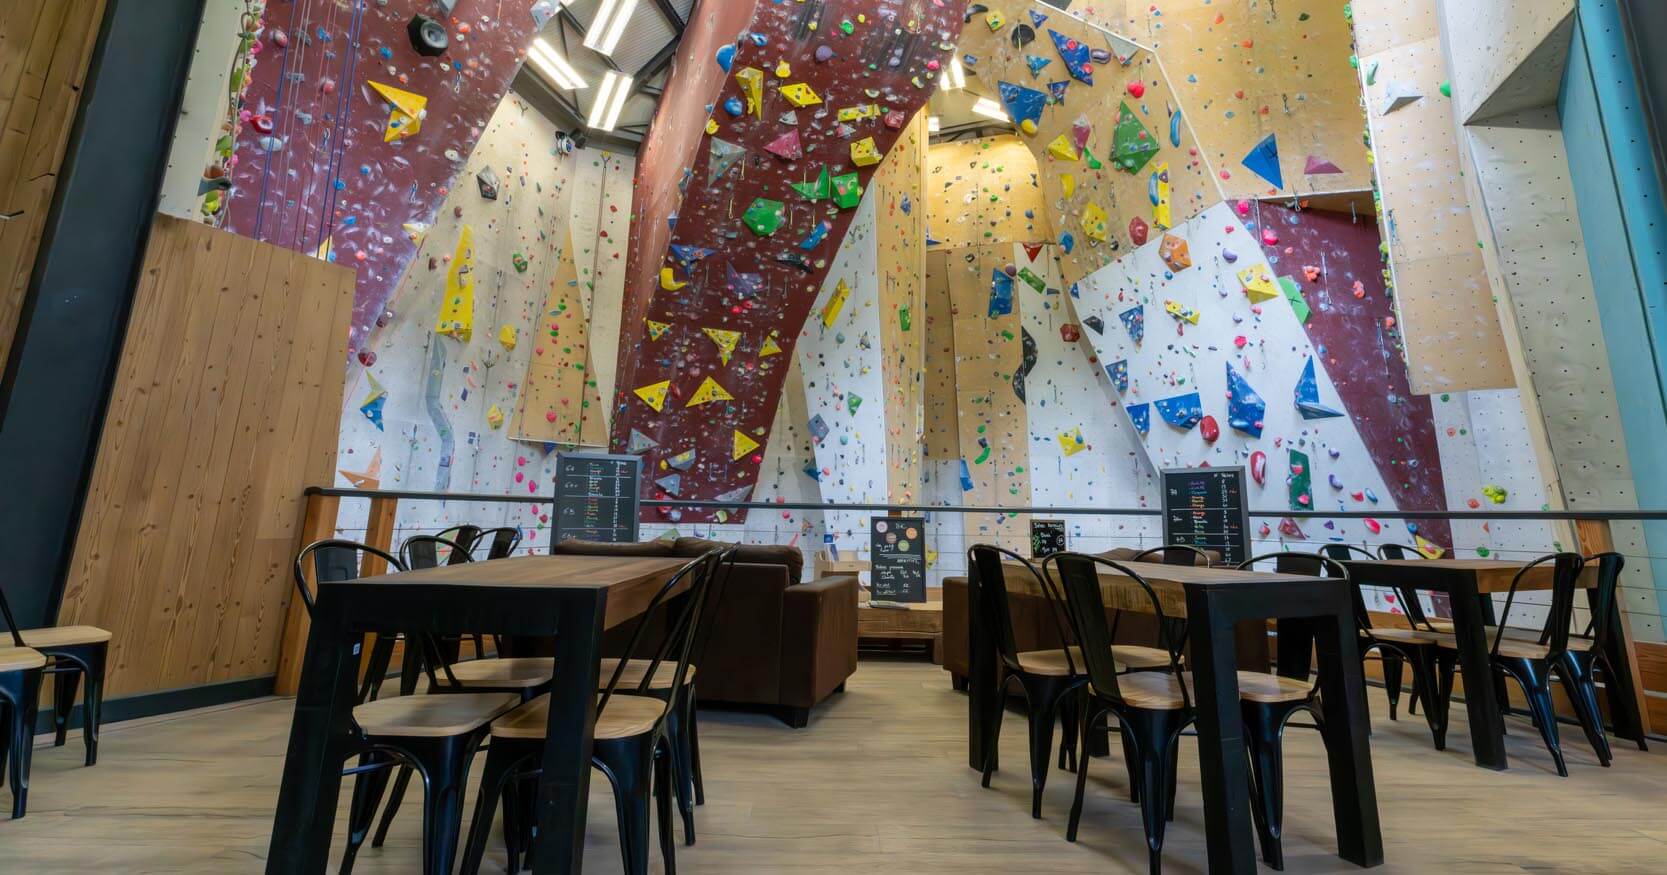 Mont Blanc Climbing Centre - Bar, Climbing Wall, Opening Hours, prices, Chamonix, Les Houches